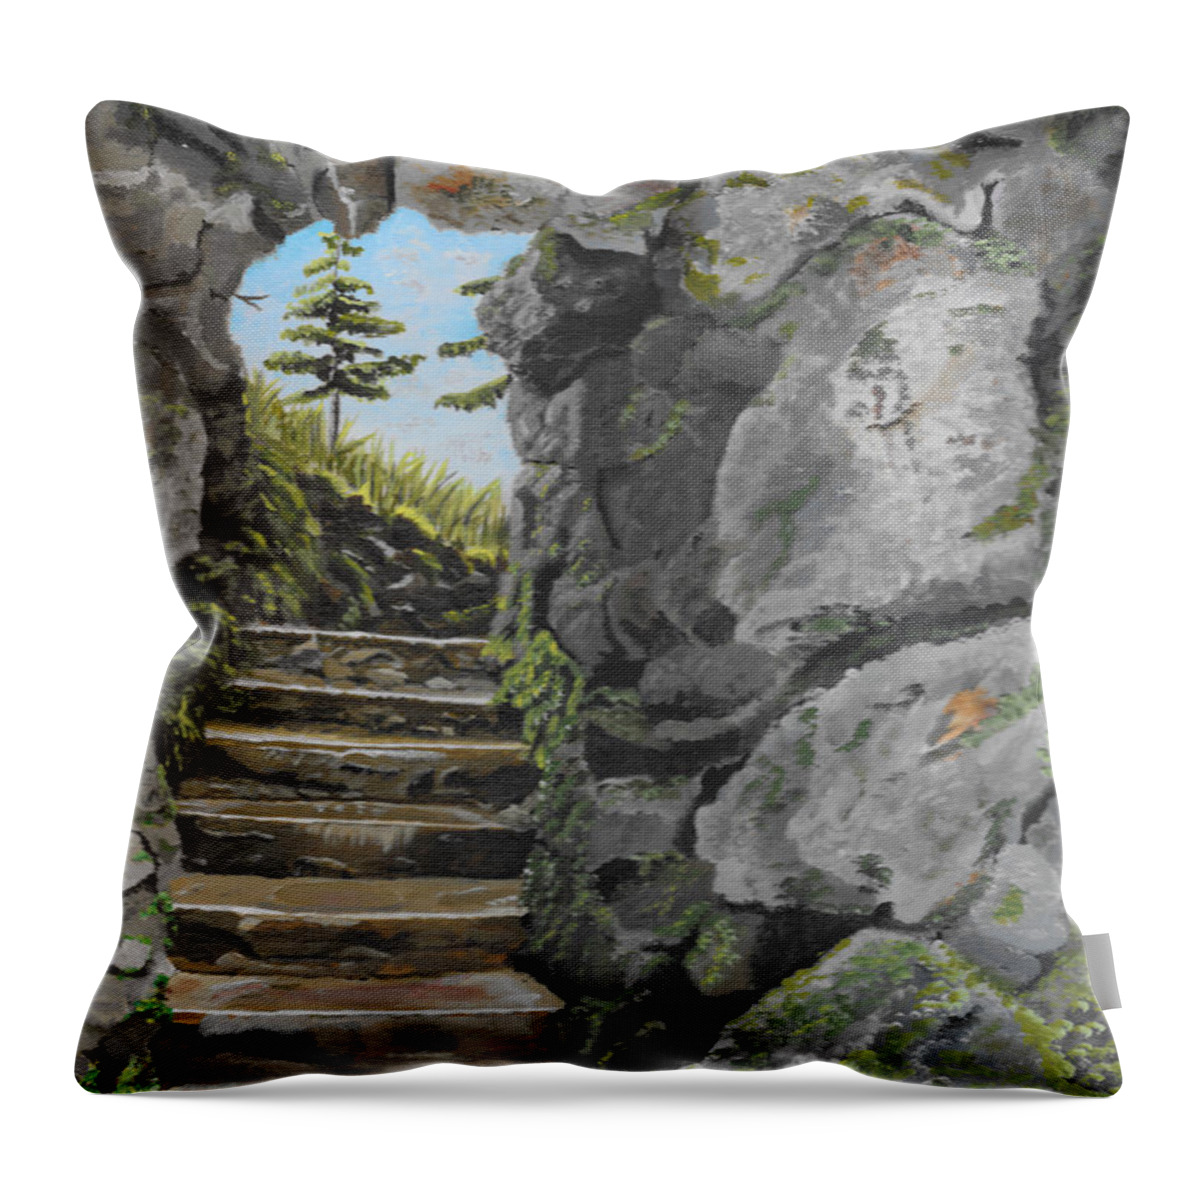 Ireland Throw Pillow featuring the painting Irish Stairs by David Bigelow